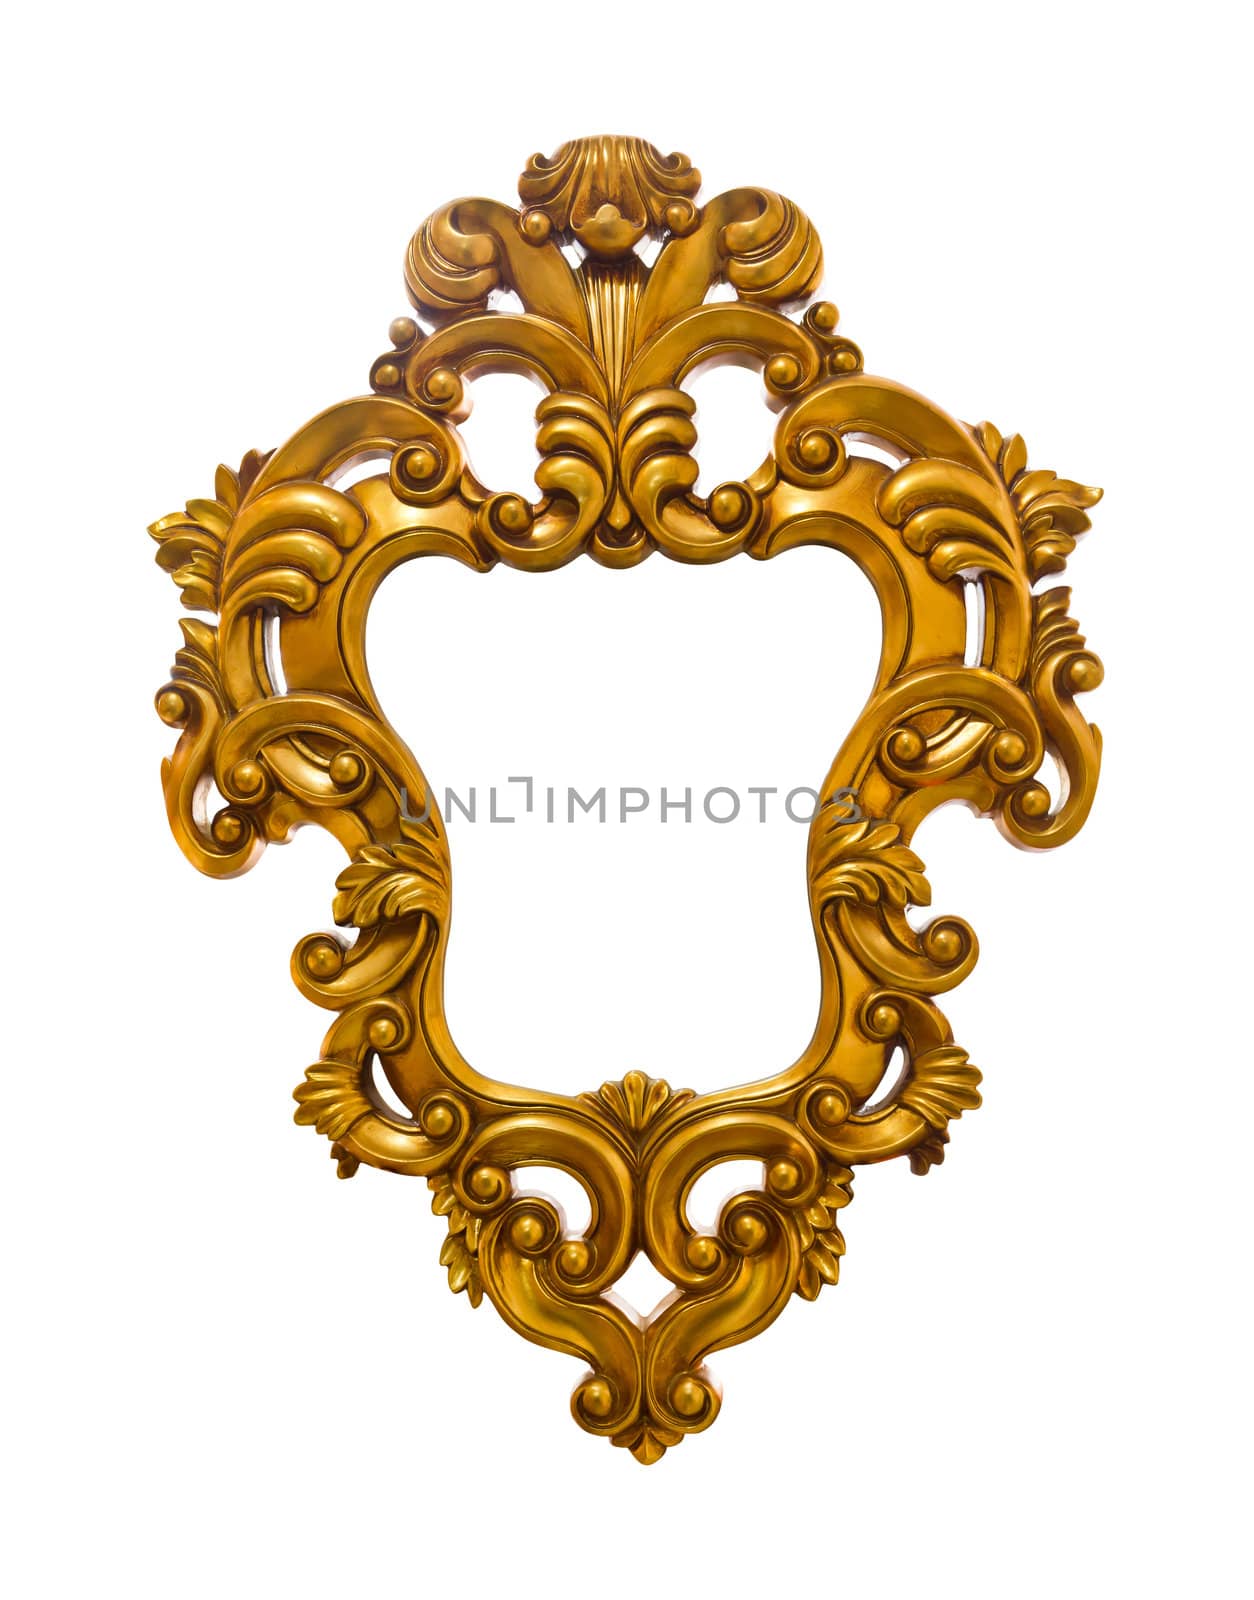 golden sculpture frame isolated with clipping path  by tungphoto